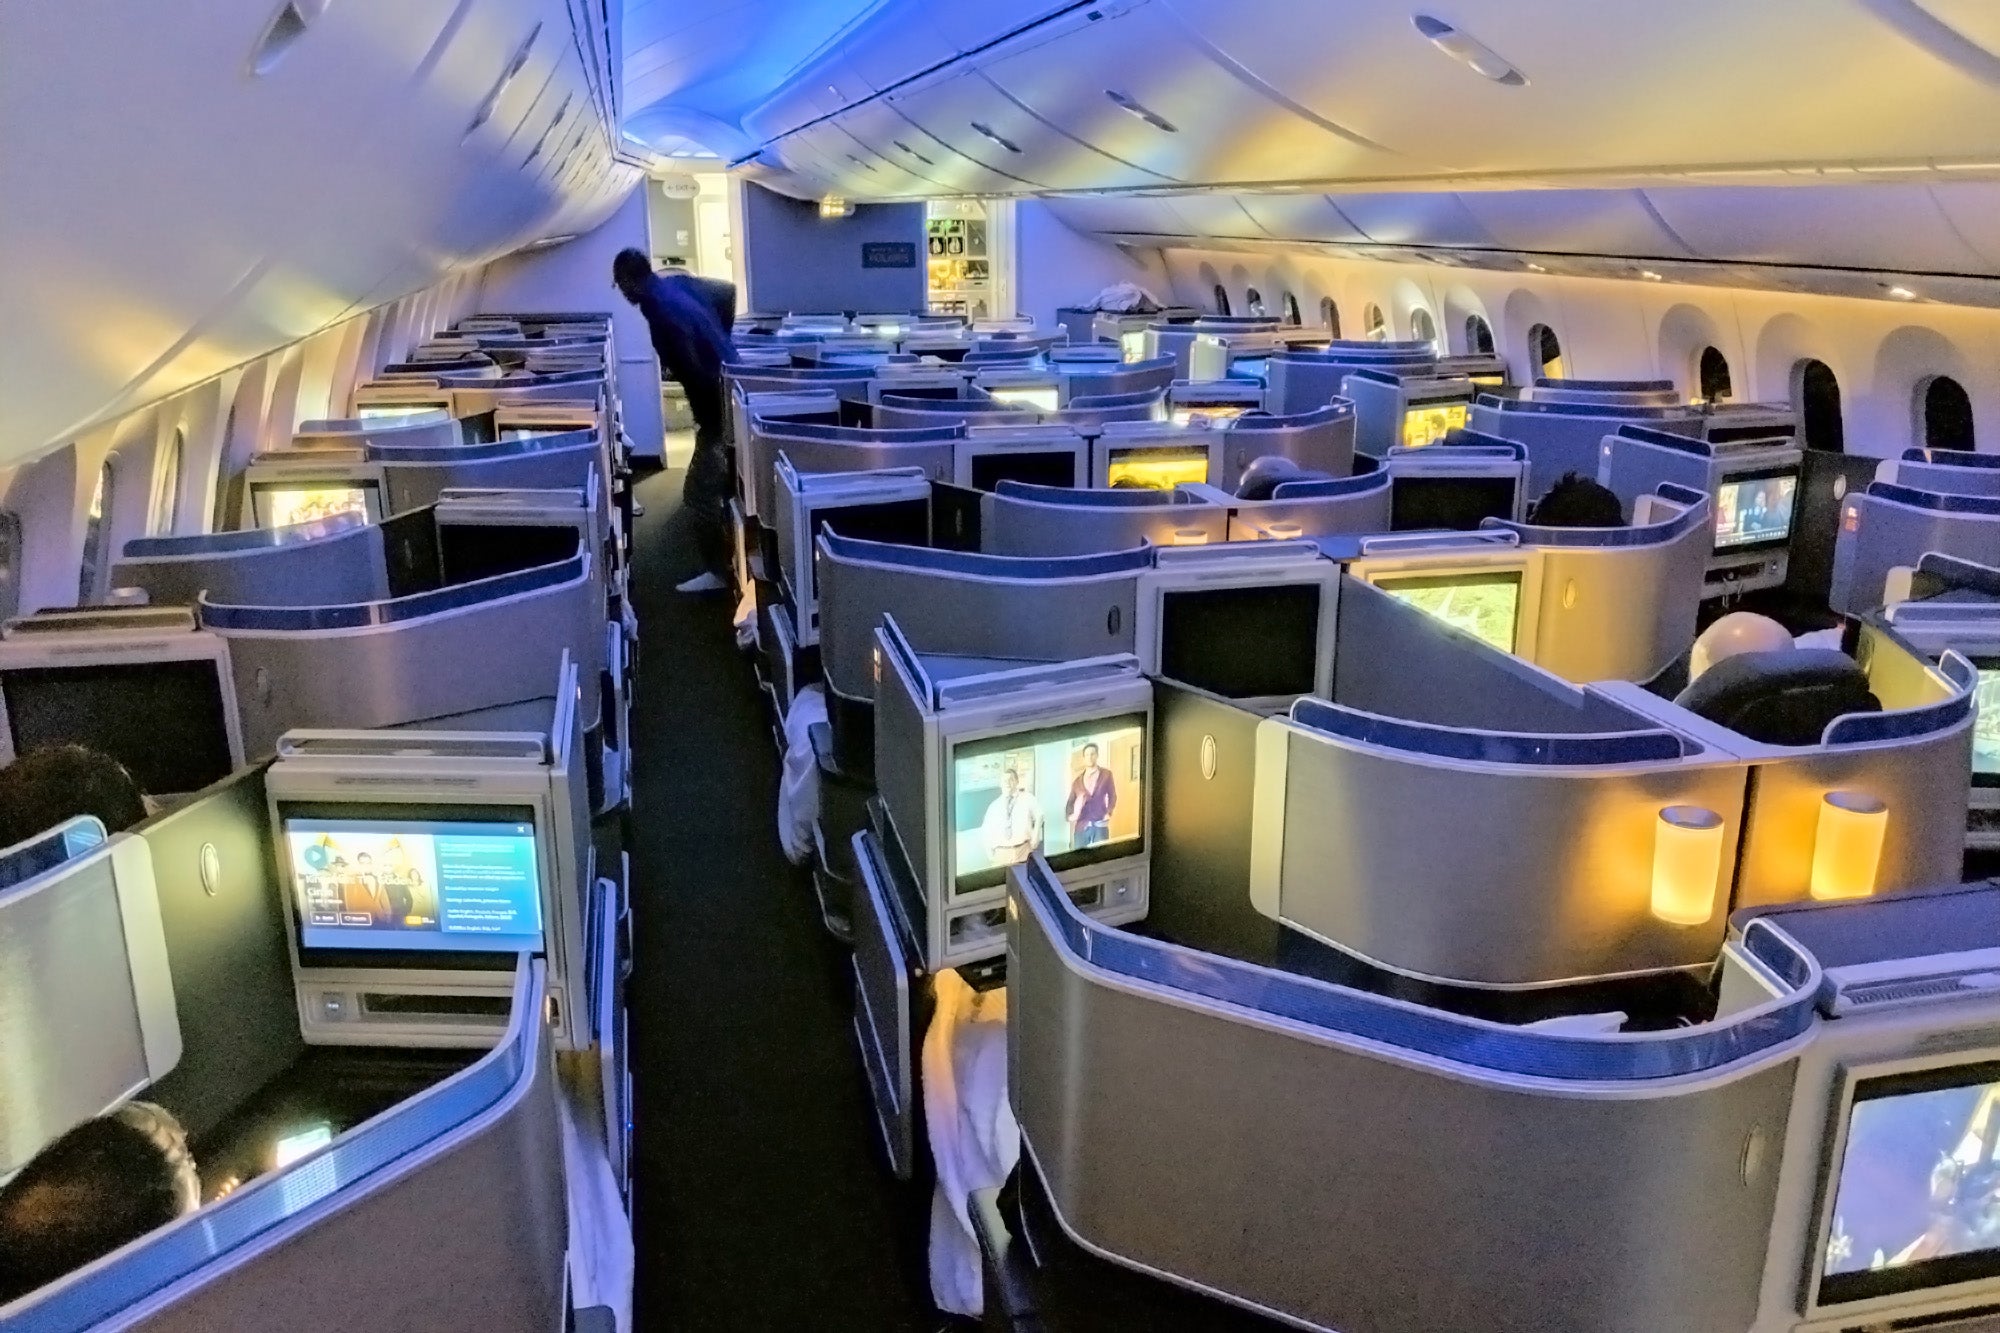 United's Polaris business class now uses the same fare codes as domestic first class. Photo by Zach Honig.